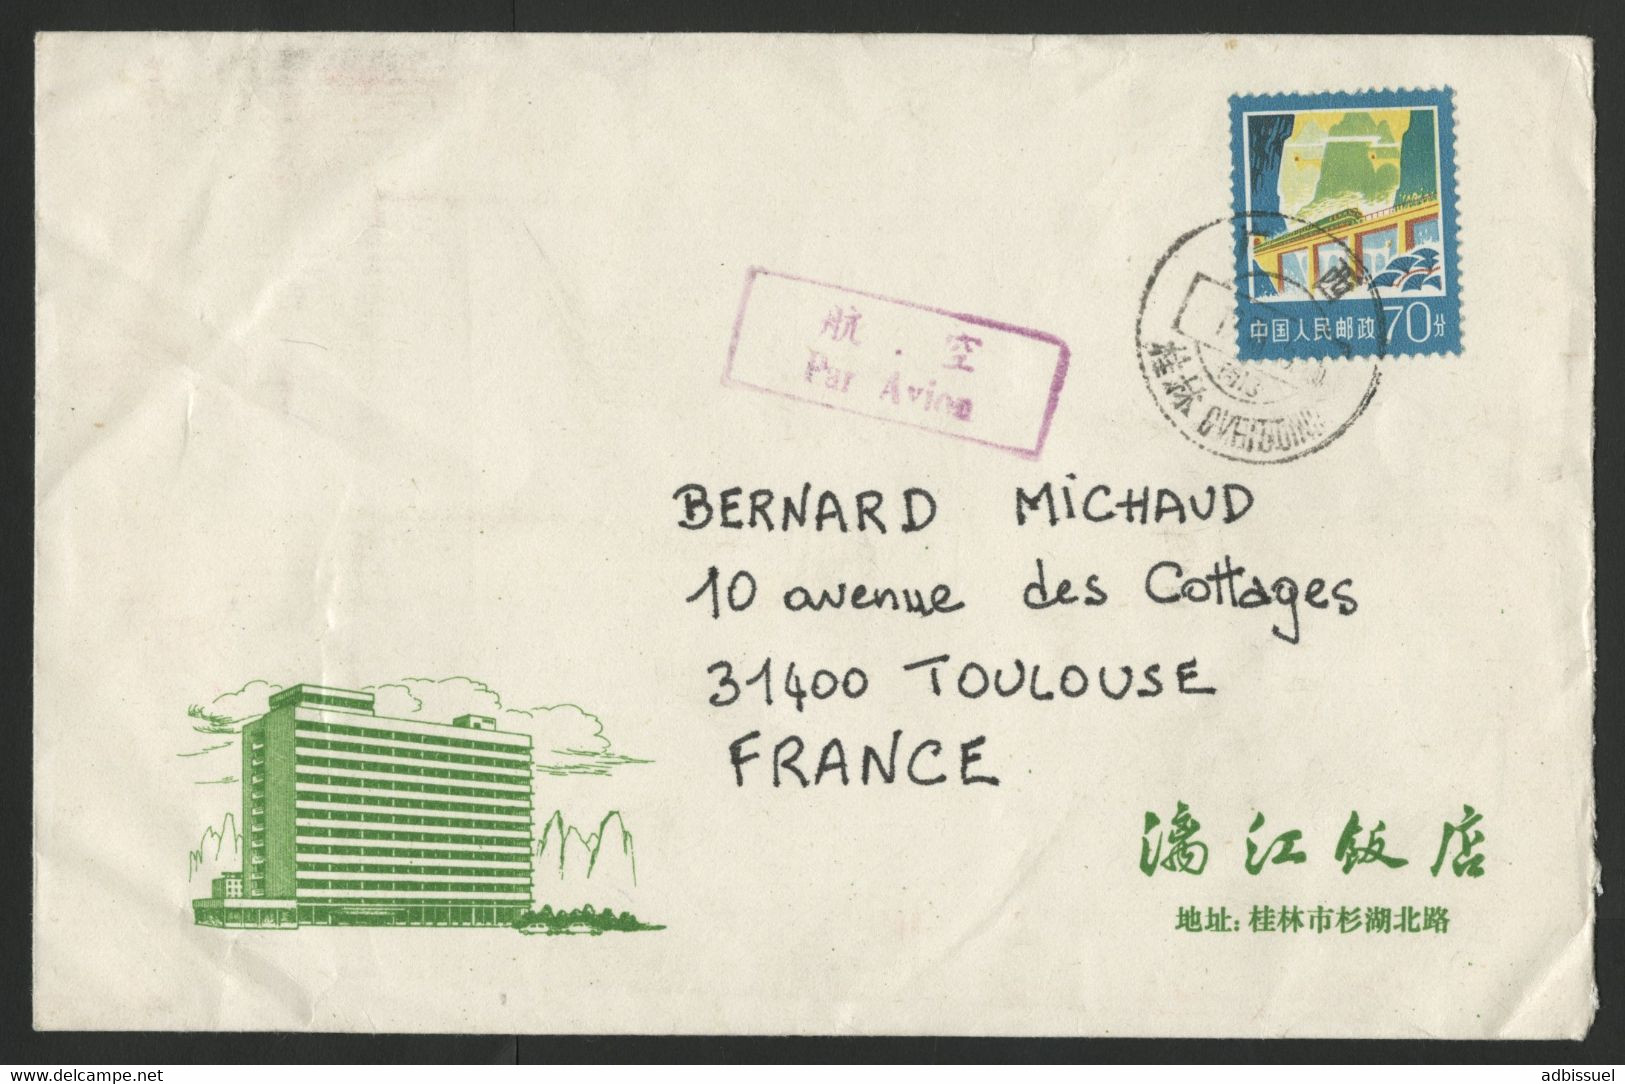 CHINA N° 2072 "Bridge / Viaduc" On An Illustrated Envelope By Airmail To France. - Covers & Documents